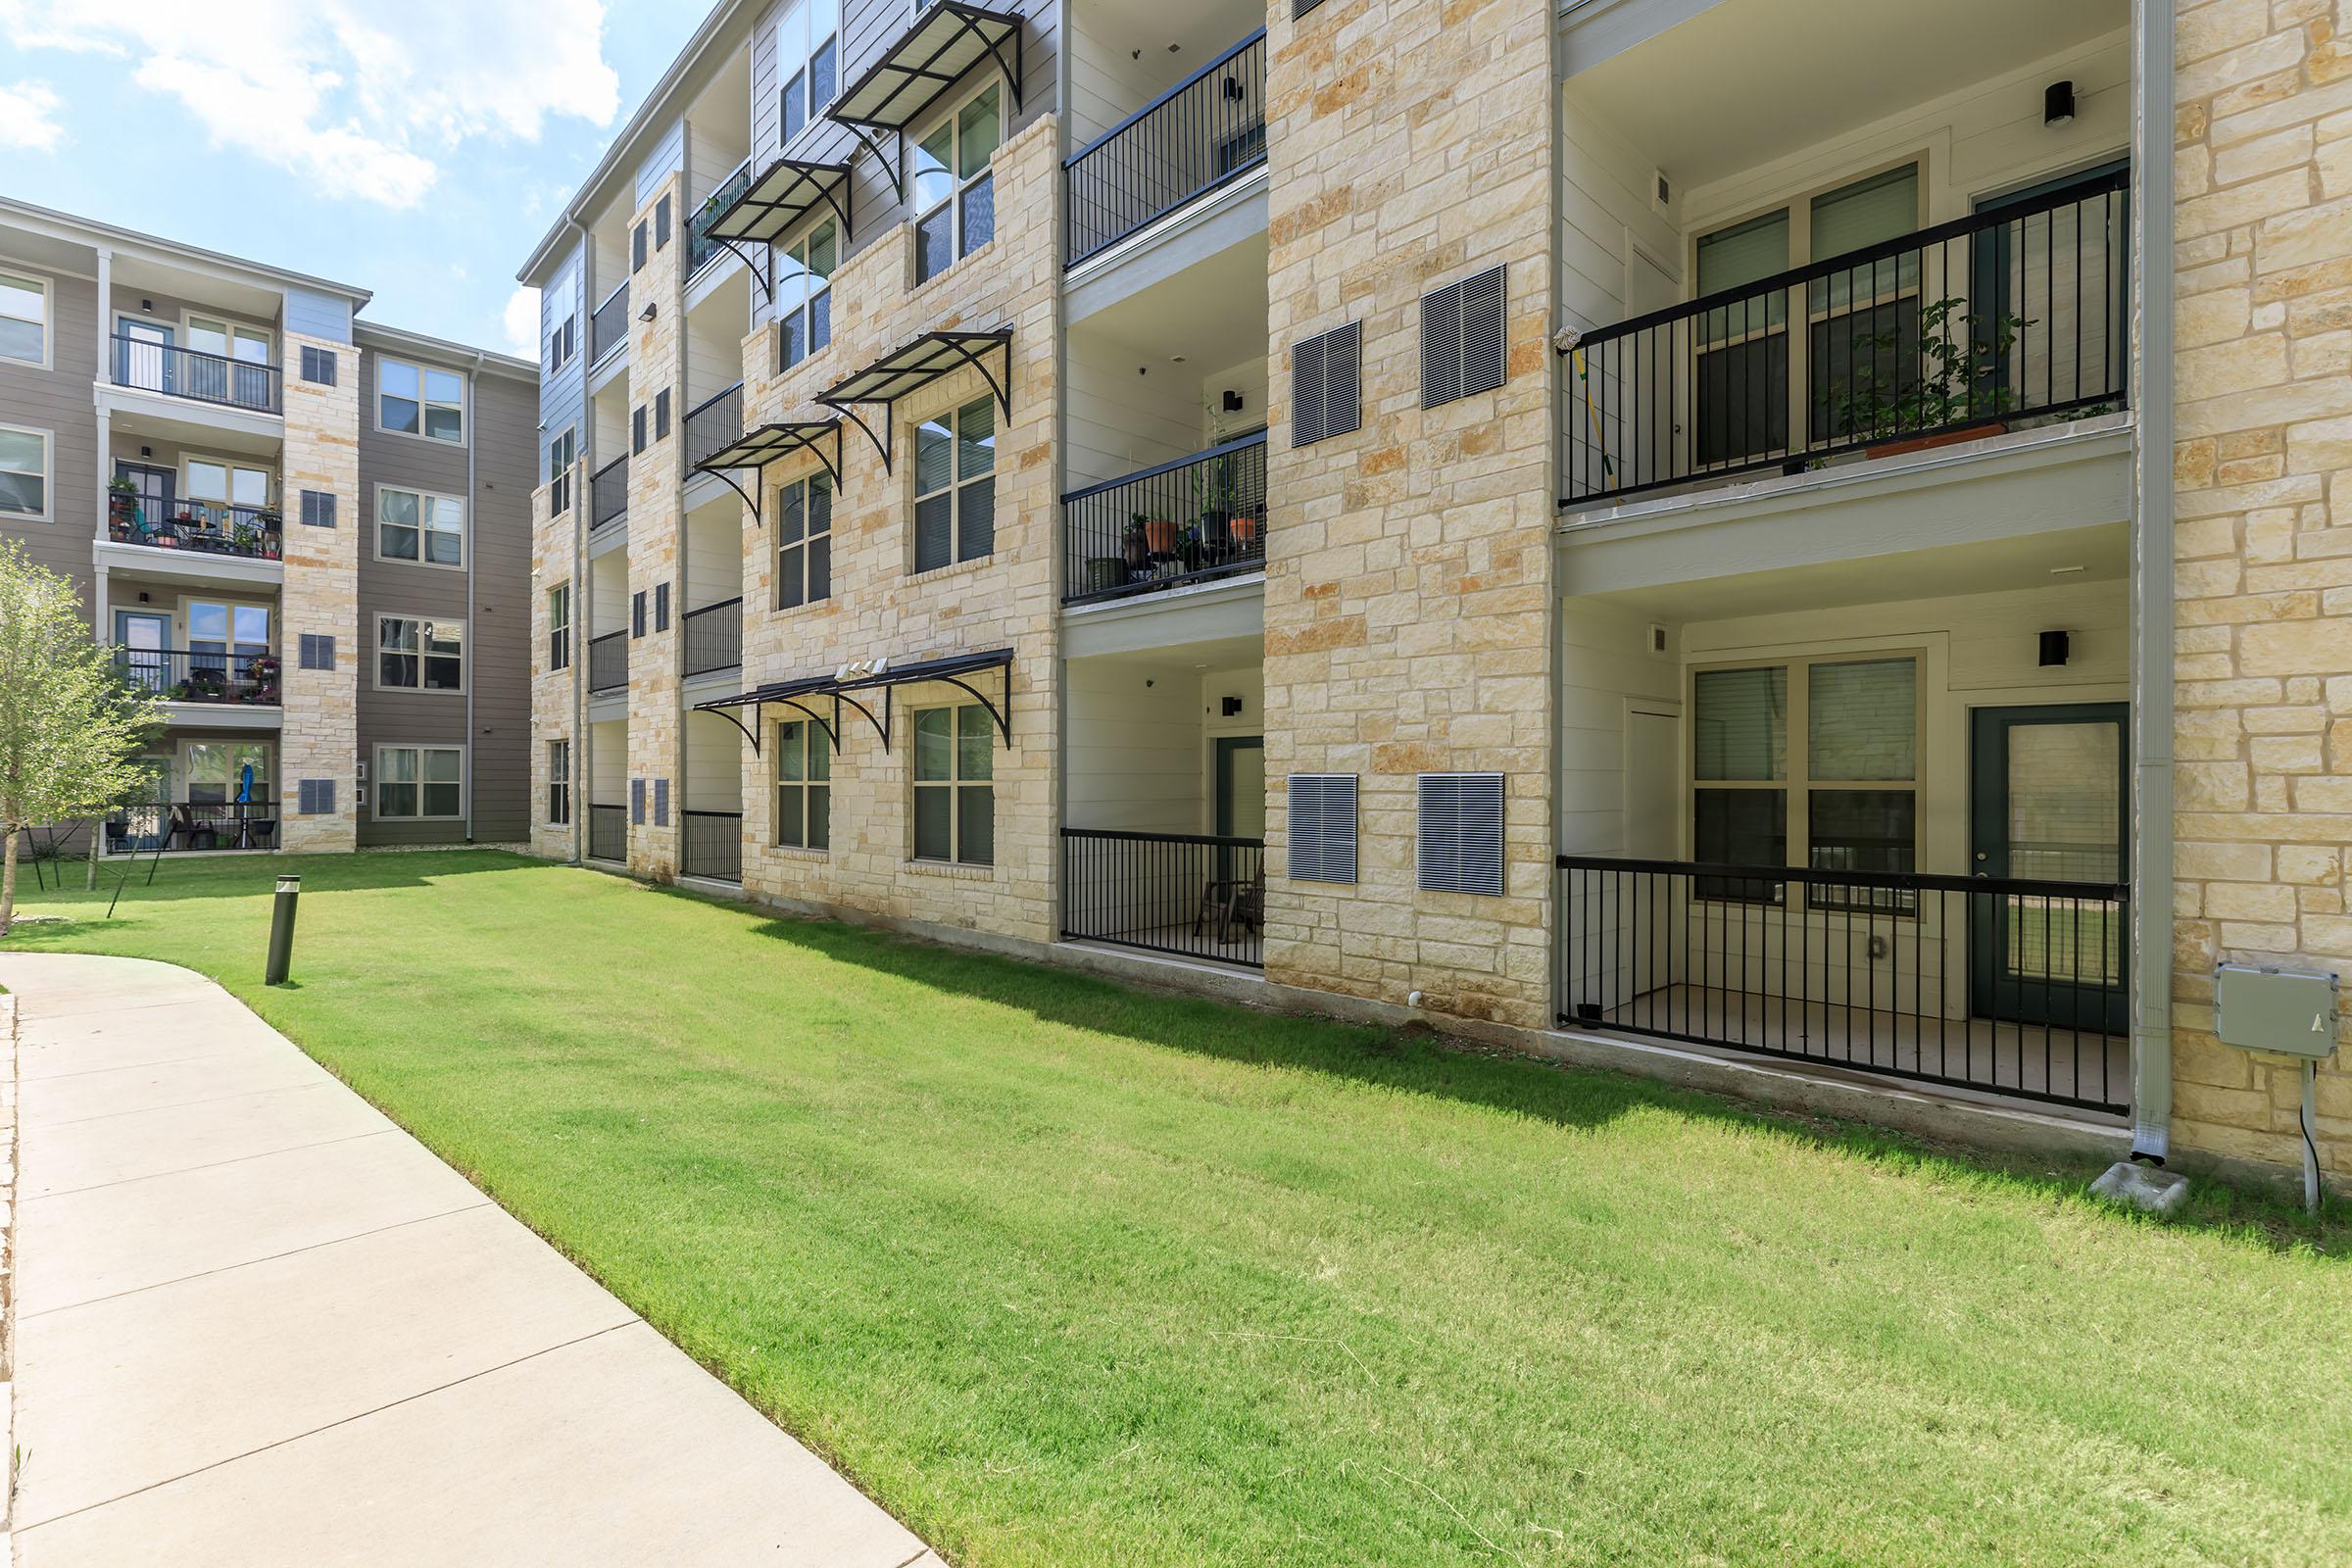 Pflugerville Senior Living - Legacy Ranch at Dessau East - Exterior View Of Lush Green Lawn In Front Of Three-Story Building Featuring White Stone Walls and Private Patio Balconies